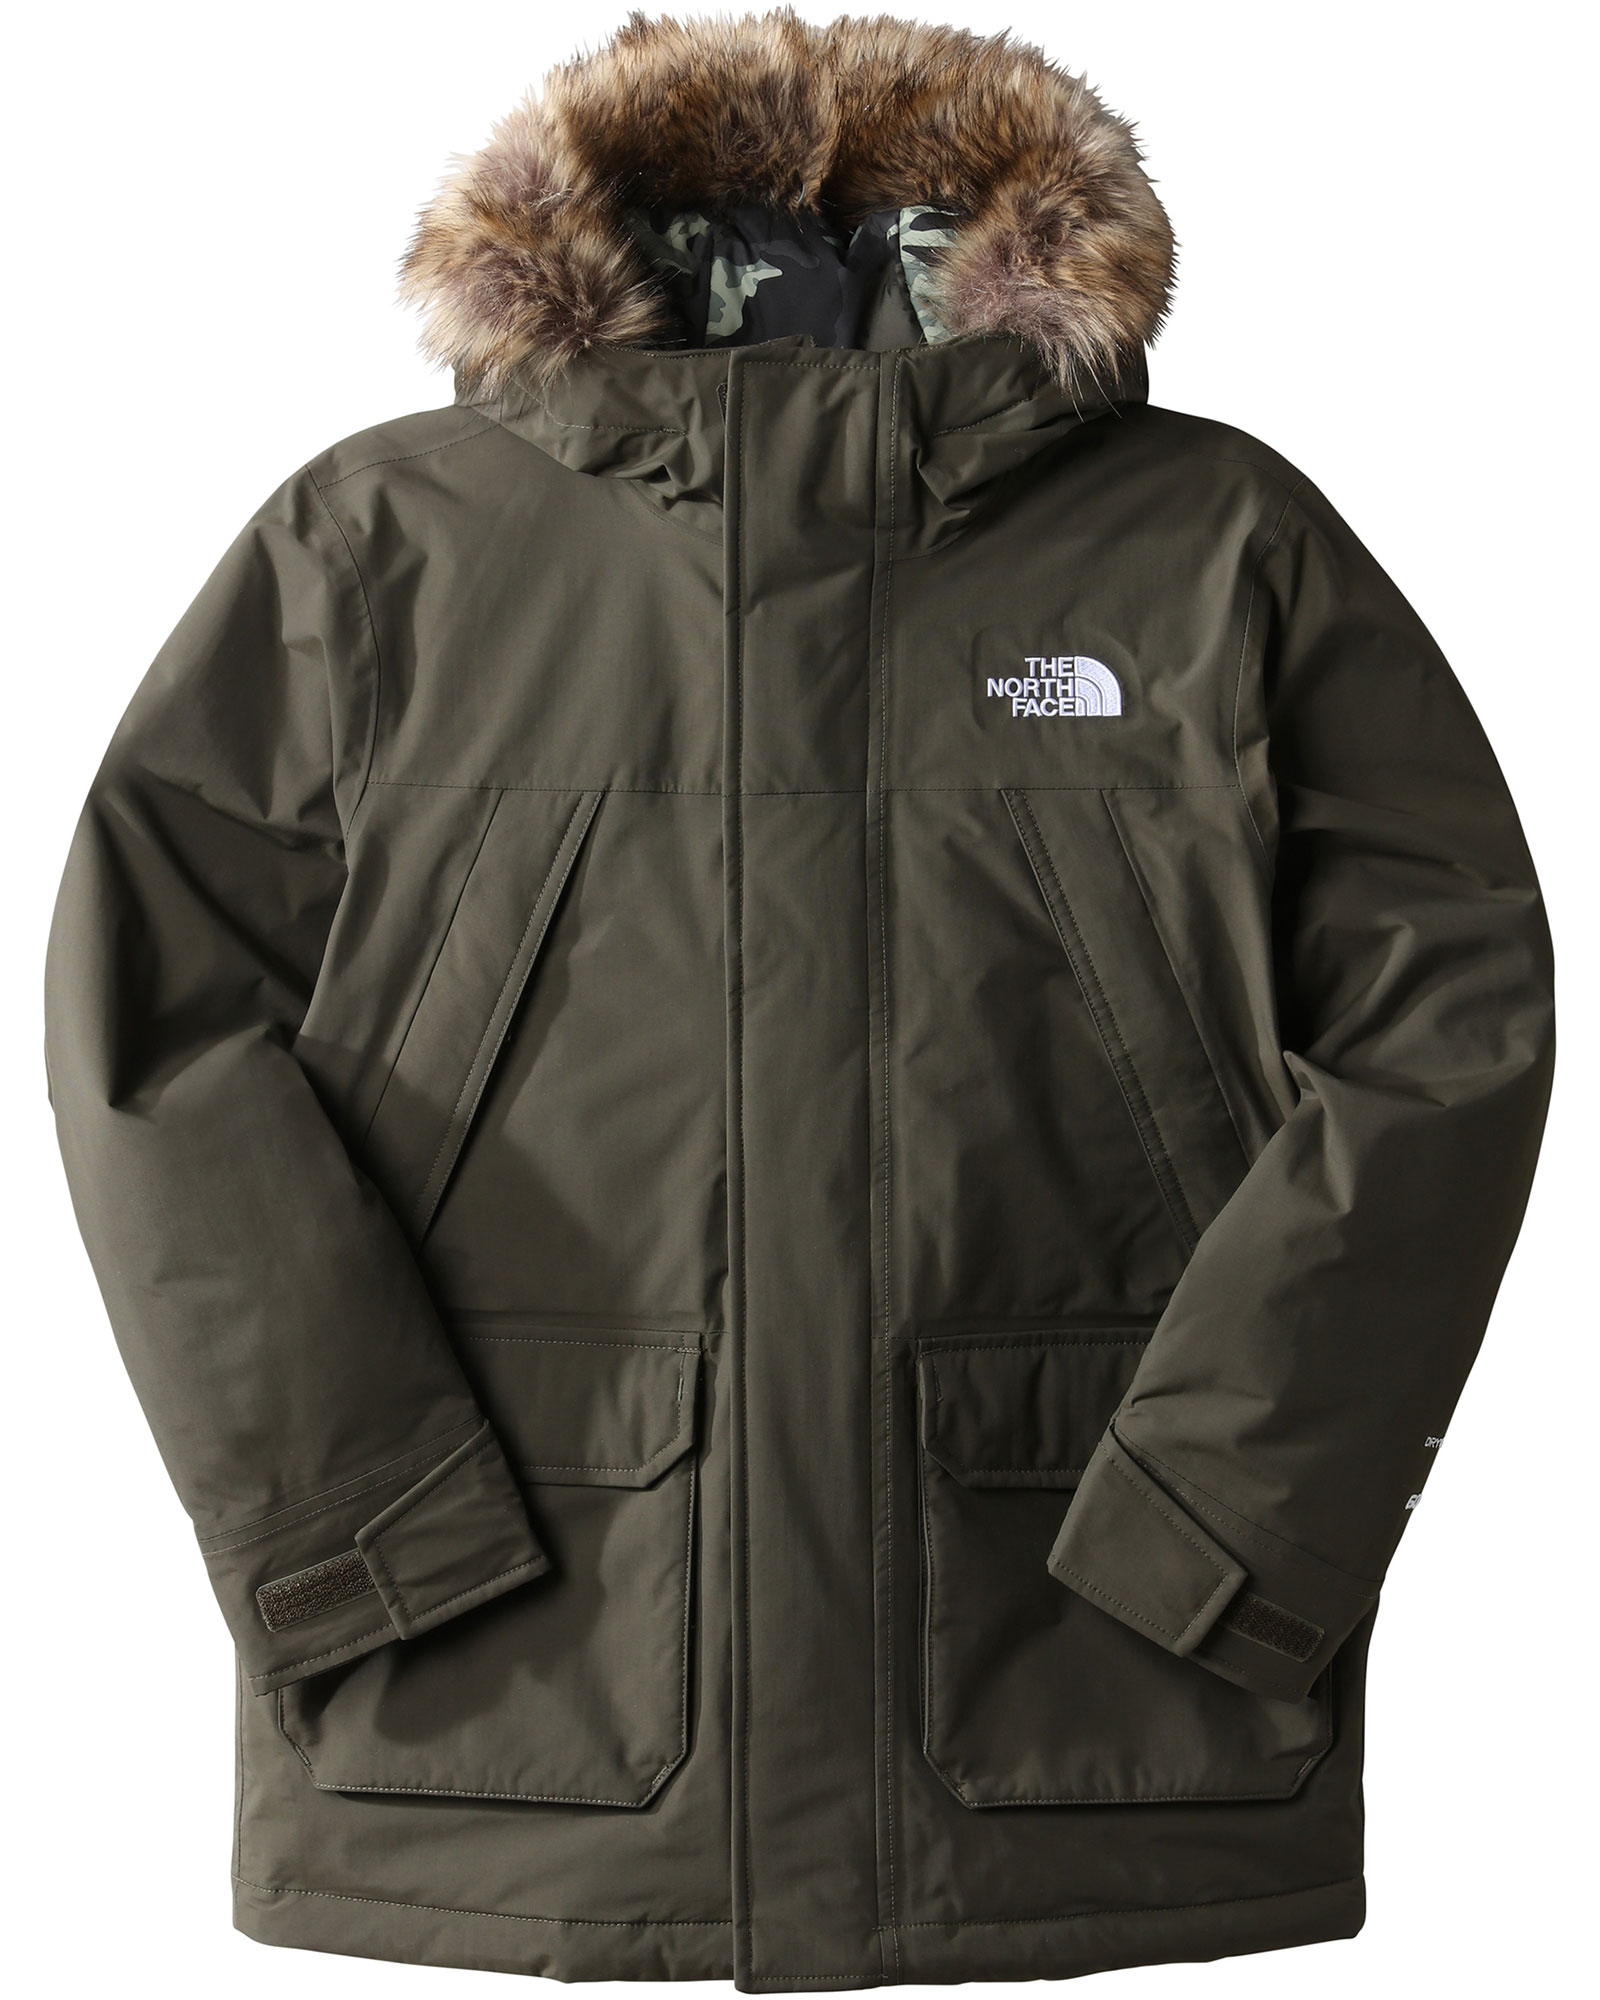 Product image of The North Face McMurdo Kids' Parka Jacket XL